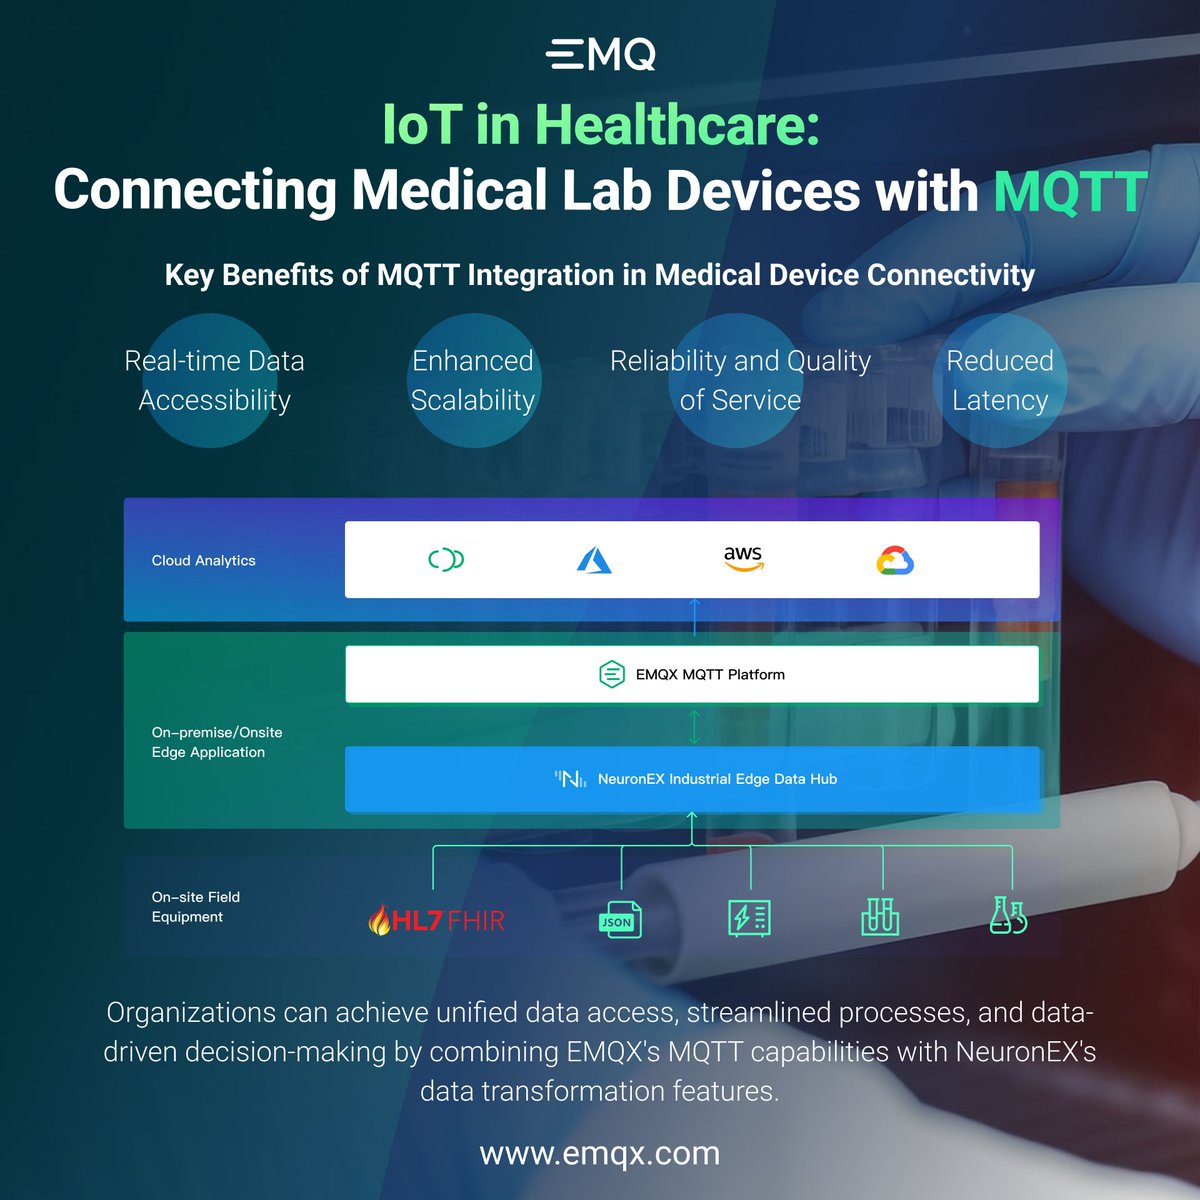 🏥#MQTT integration in #medicallabs promotes efficient and effective patient care. Harness the full potential of diagnostic tools with MQTT's interoperability and real-time communication! #HealthcareTech #MedTech #IoT #DigitalHealth #FutureOfHealthcare 🔗 social.emqx.com/u/YJGduZ